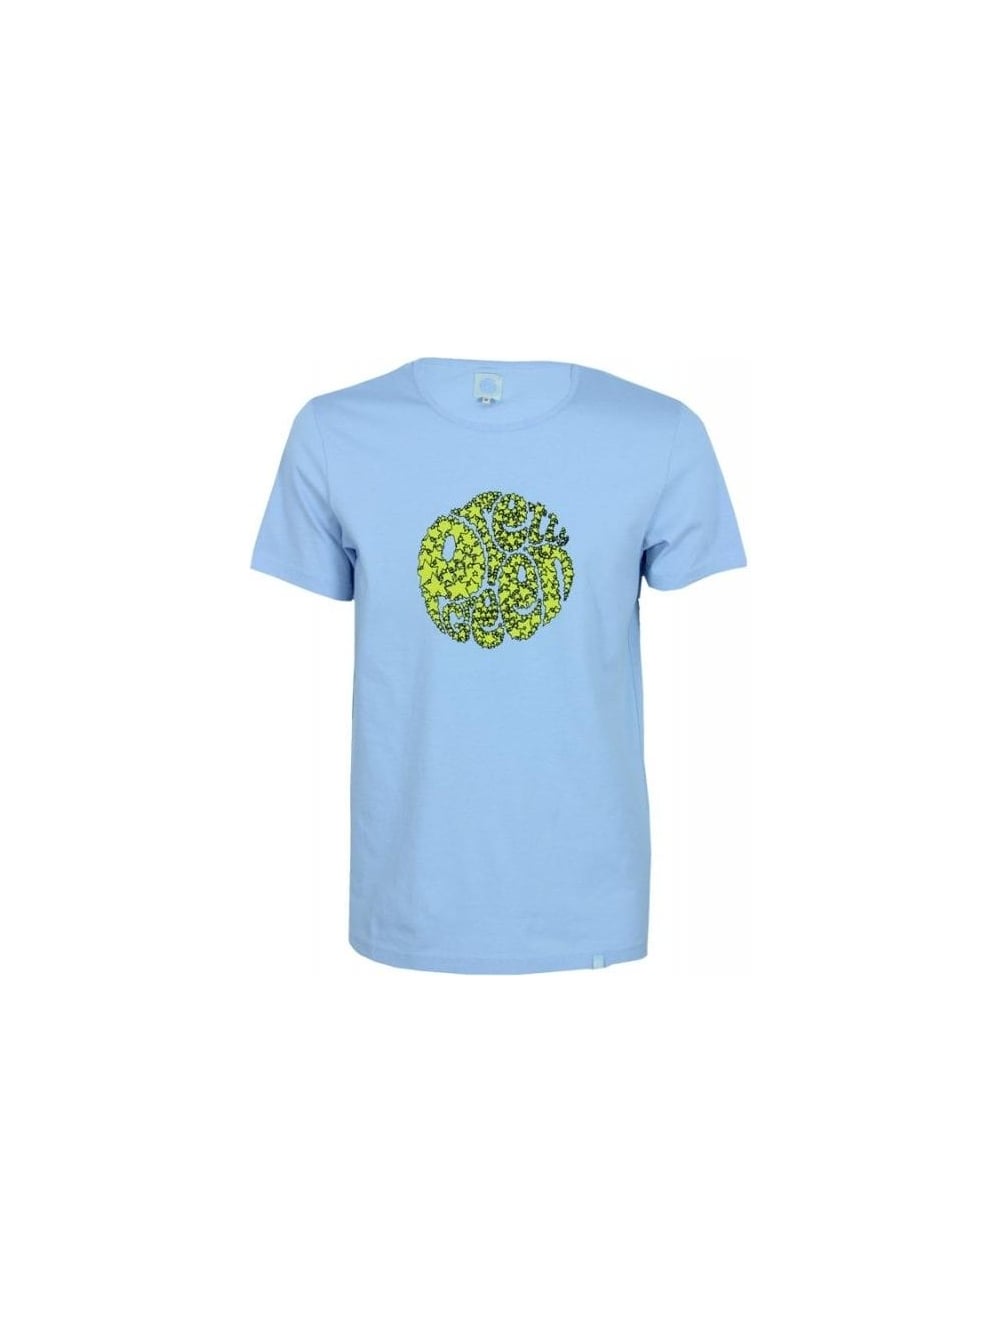 Blue Green with White Star Logo - Pretty Green Star Logo Print T Shirt in Washed Blue